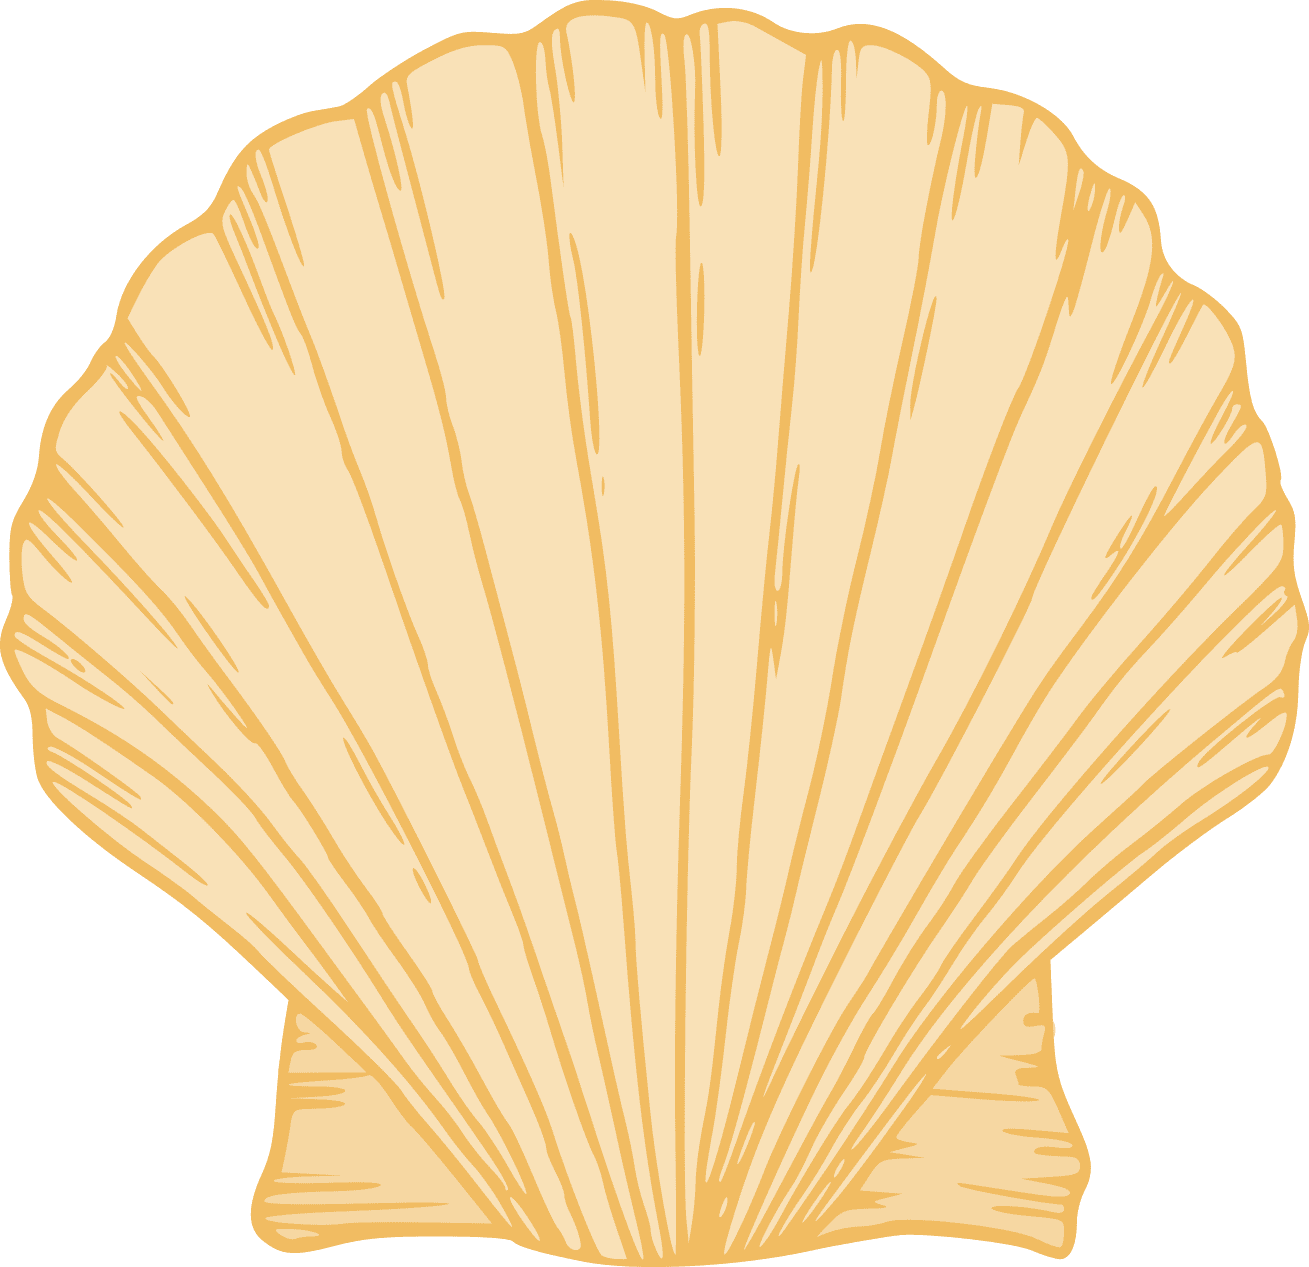 Scallop shell clipart free